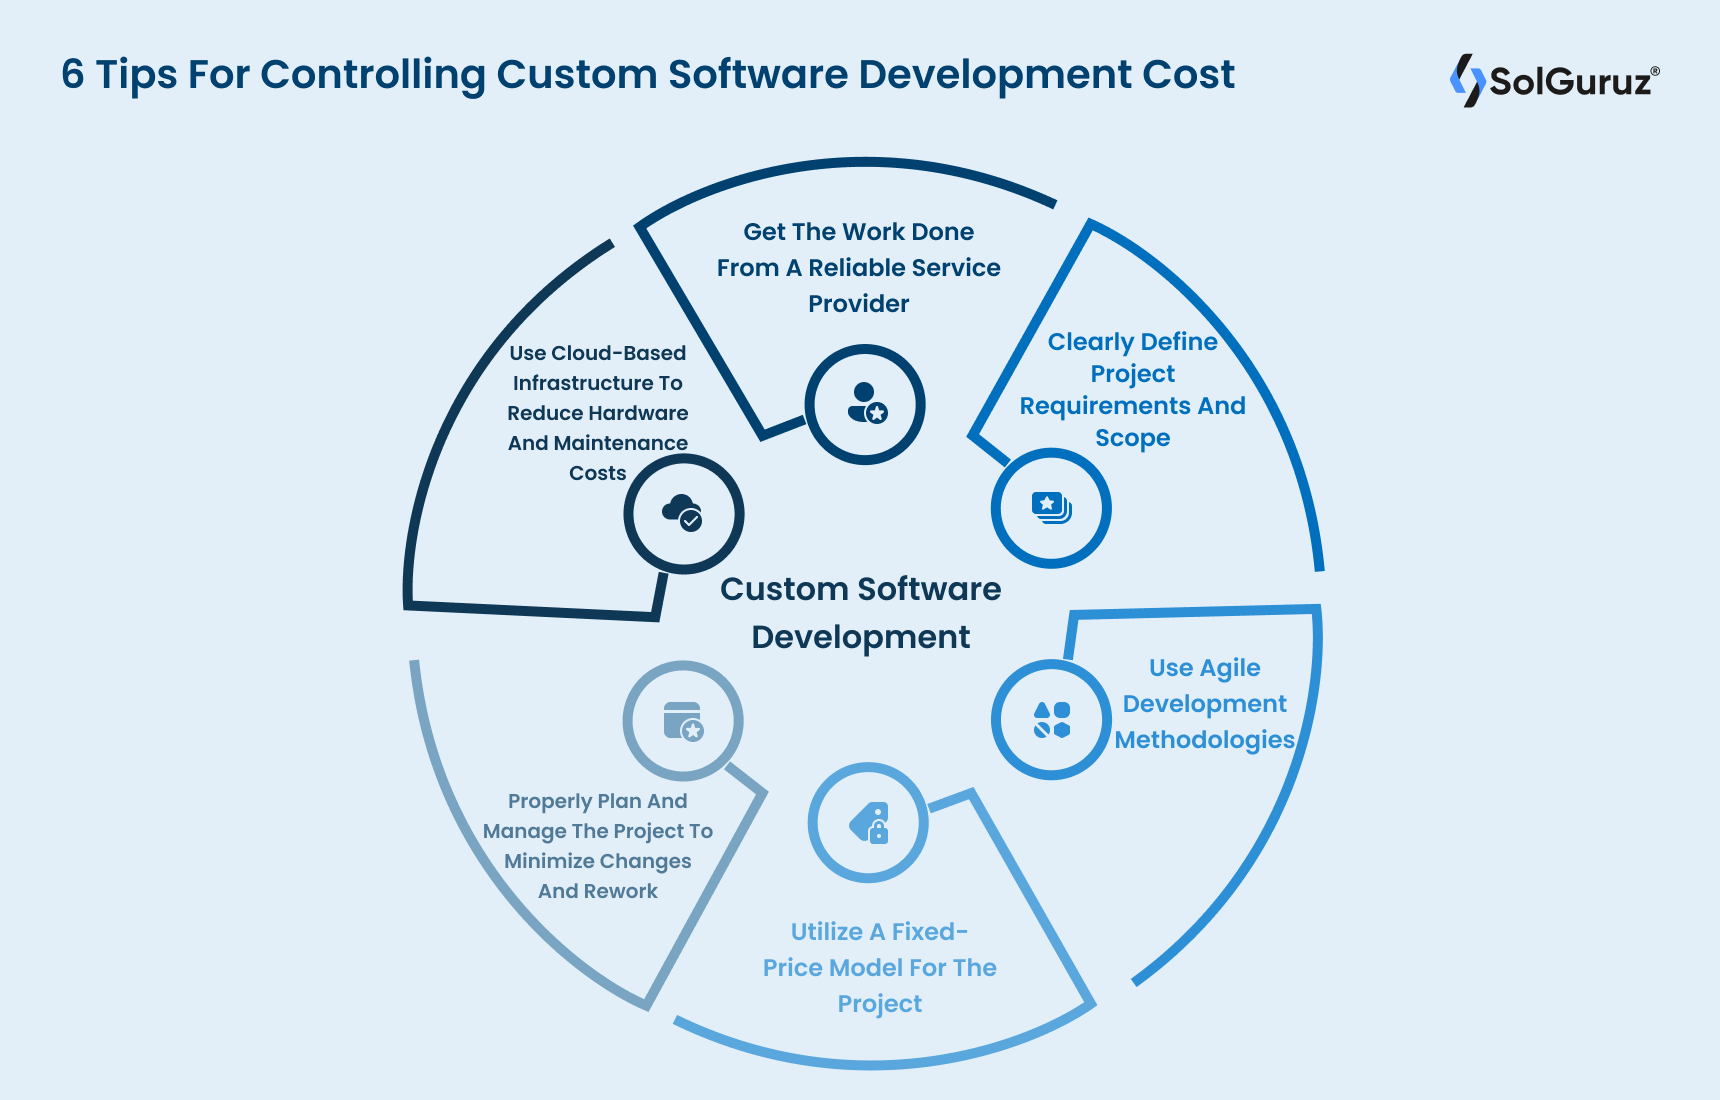 6 Tips For Controlling Custom Software Development Cost